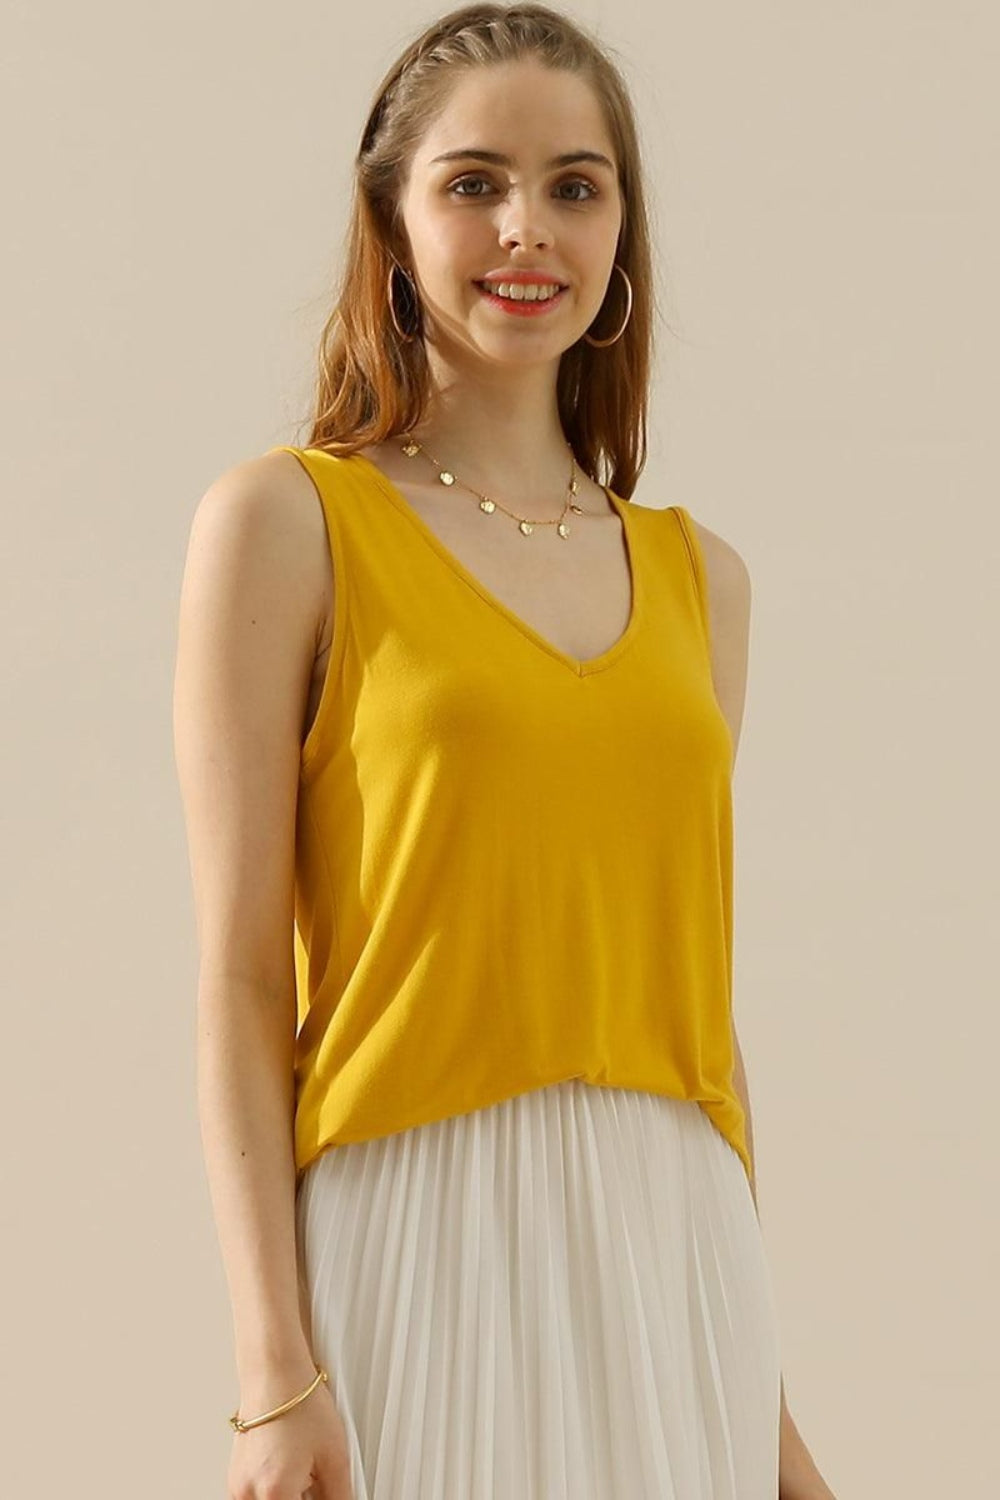 The V-Neck Curved Hem Tank is a stylish and versatile piece. With its flattering neckline and curved hem, it adds a touch of femininity to any outfit. The tank's relaxed fit provides comfort without sacrificing style. S - XL